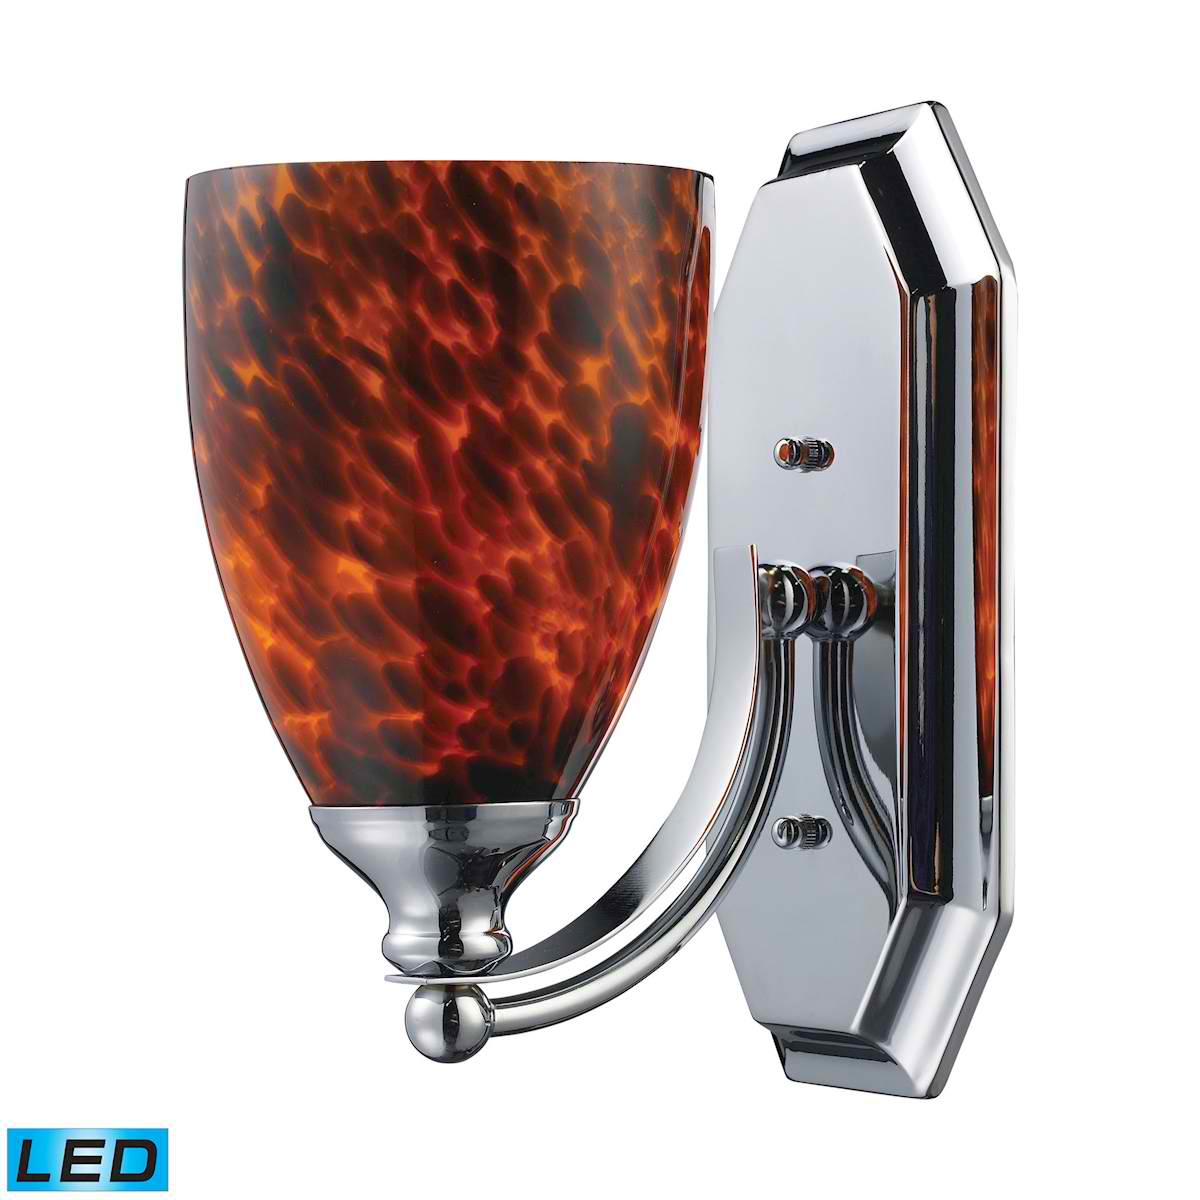 1 Light Vanity in Polished Chrome and Espresso Glass - LED Offering Up To 800 Lumens (60 Watt Equivalent)